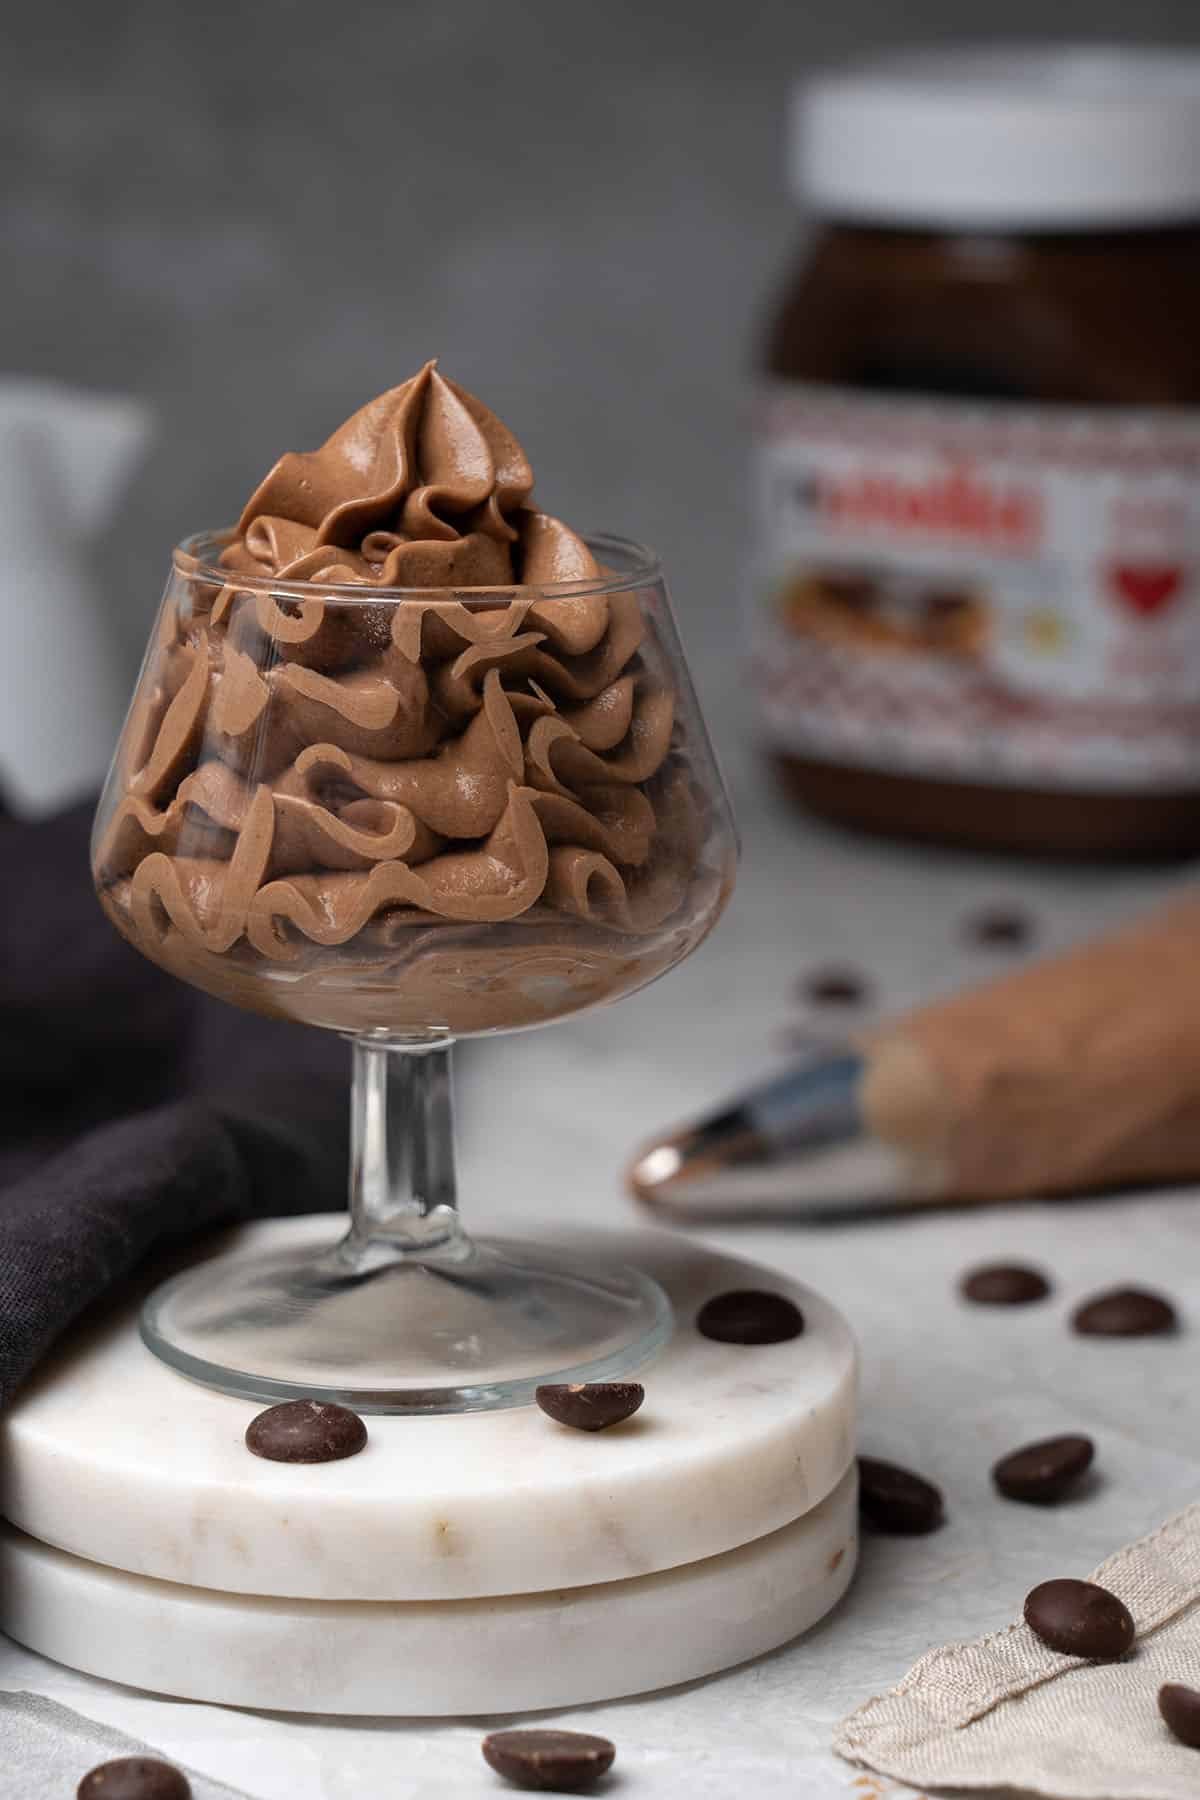 Nutella frosting in a glass.